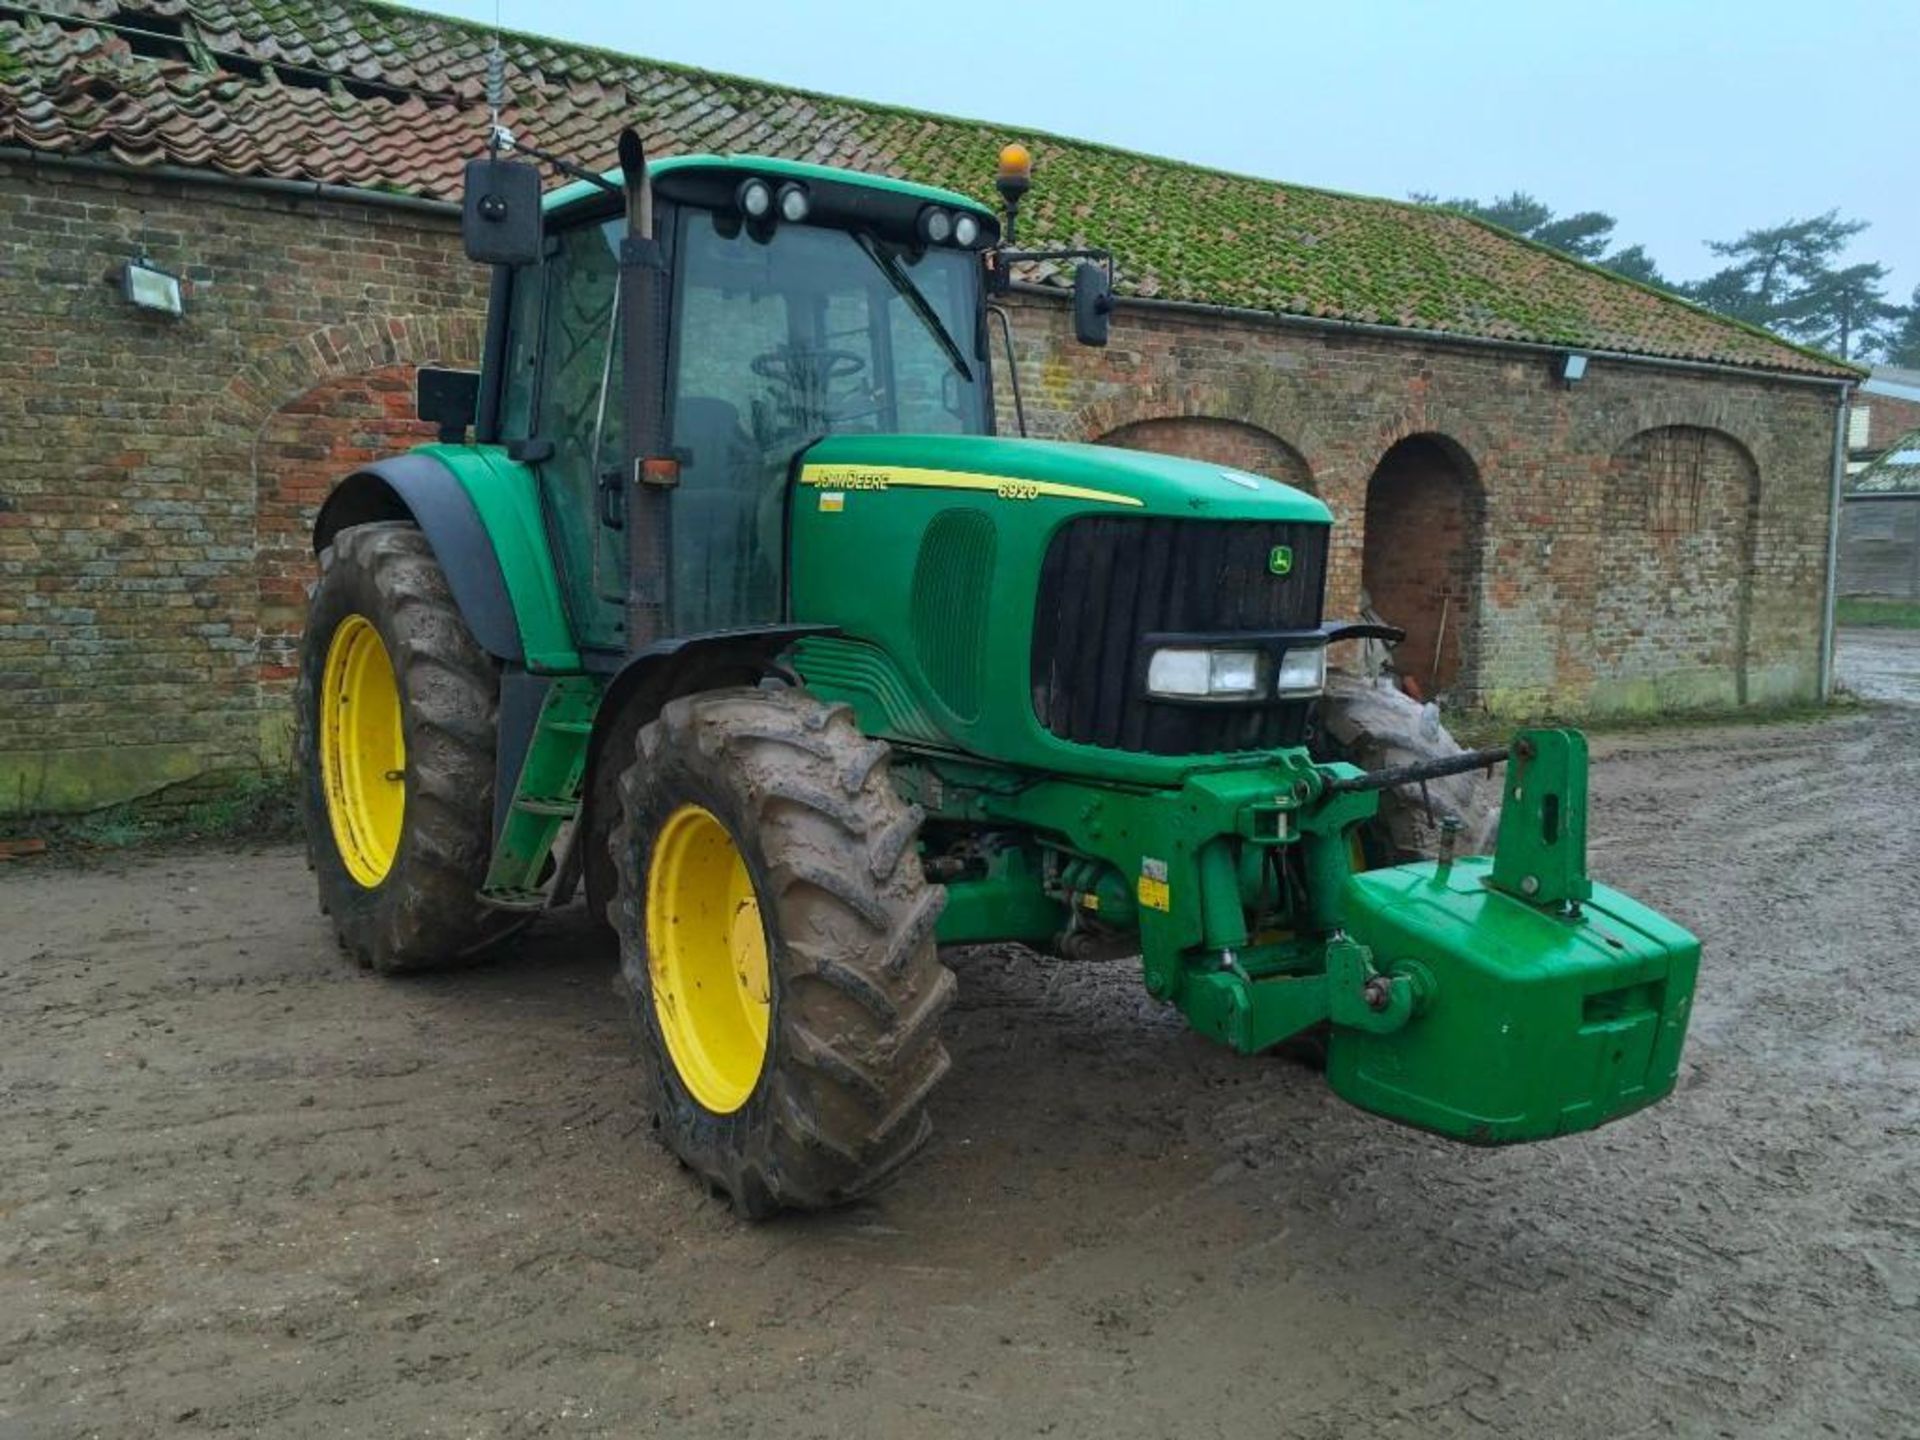 2005 John Deere 6920 40kph tractor with Power Quad gear box, 2 rear spool valves, front and rear lin - Image 3 of 9